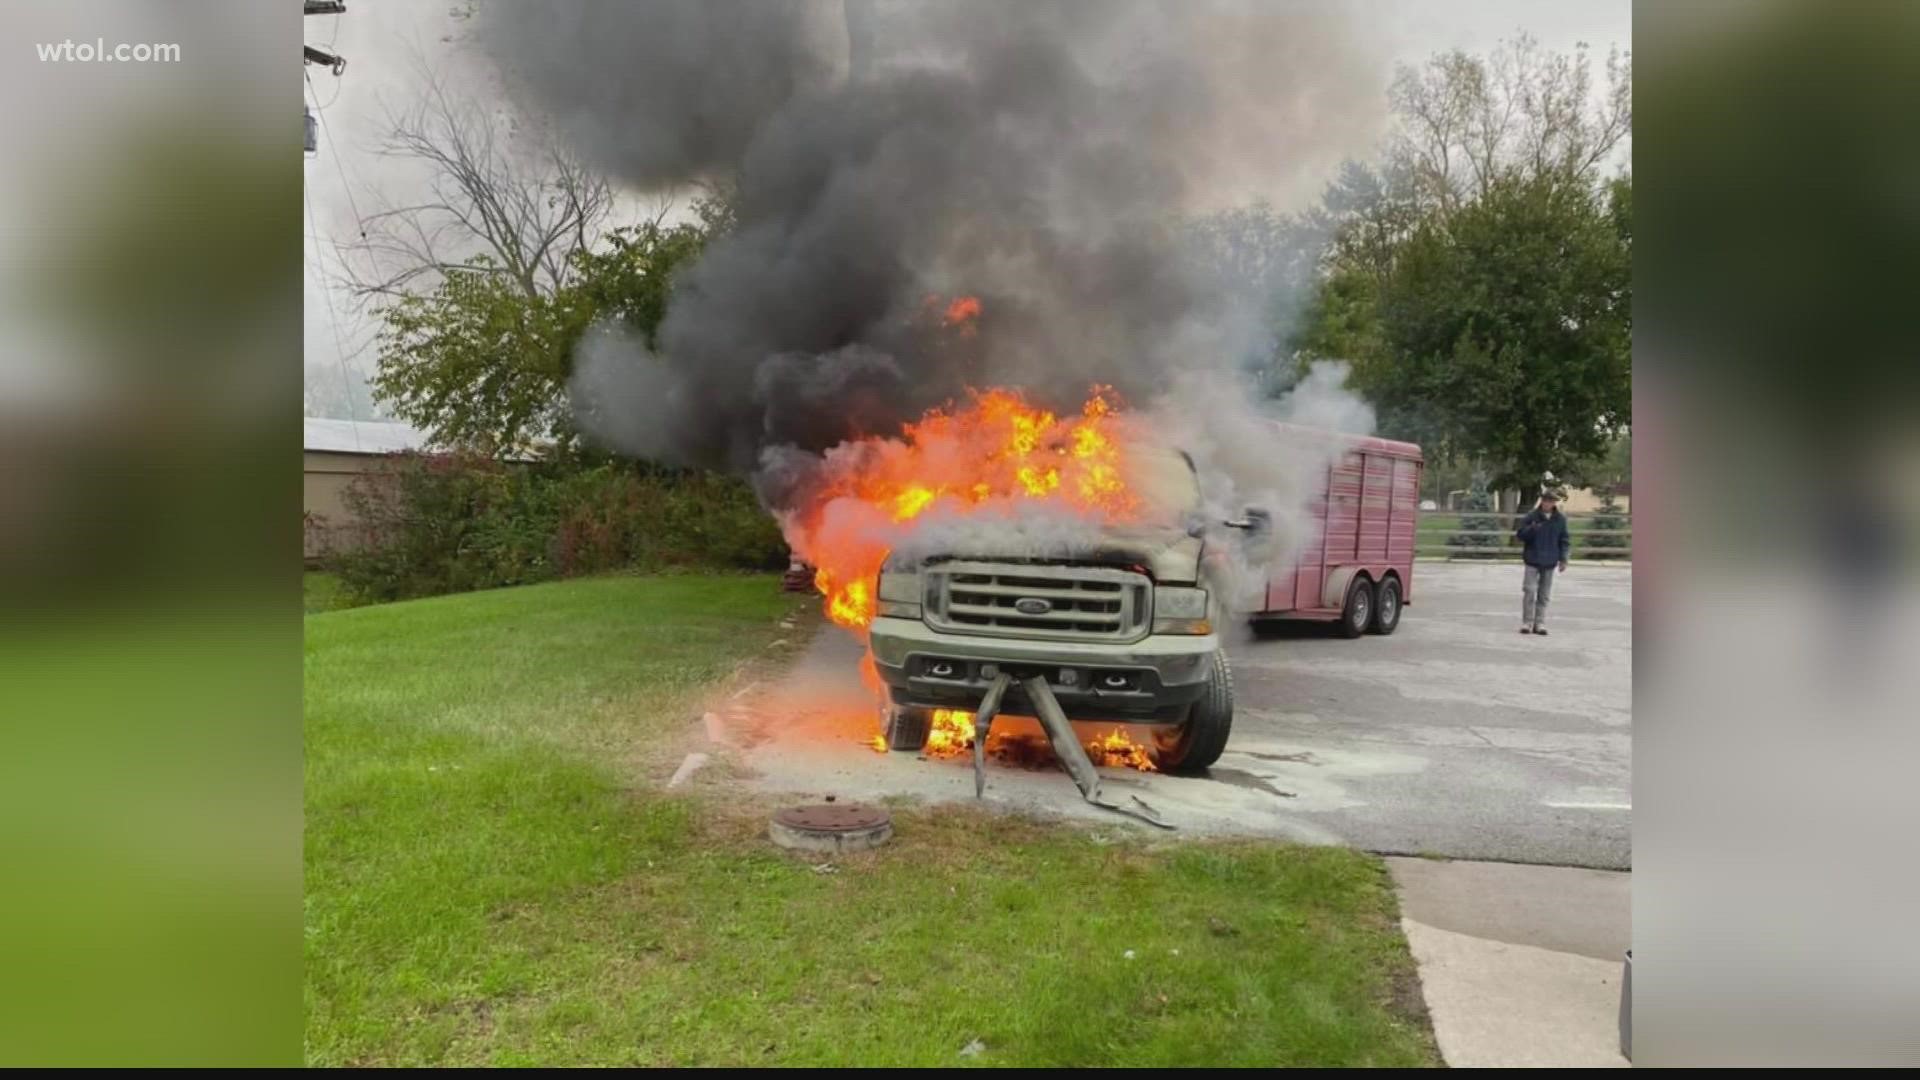 The Ford F-250 became fully engulfed in flames around 9 a.m. when it pulled into the Circle K on Airport Highway and Albon Road in Holland.